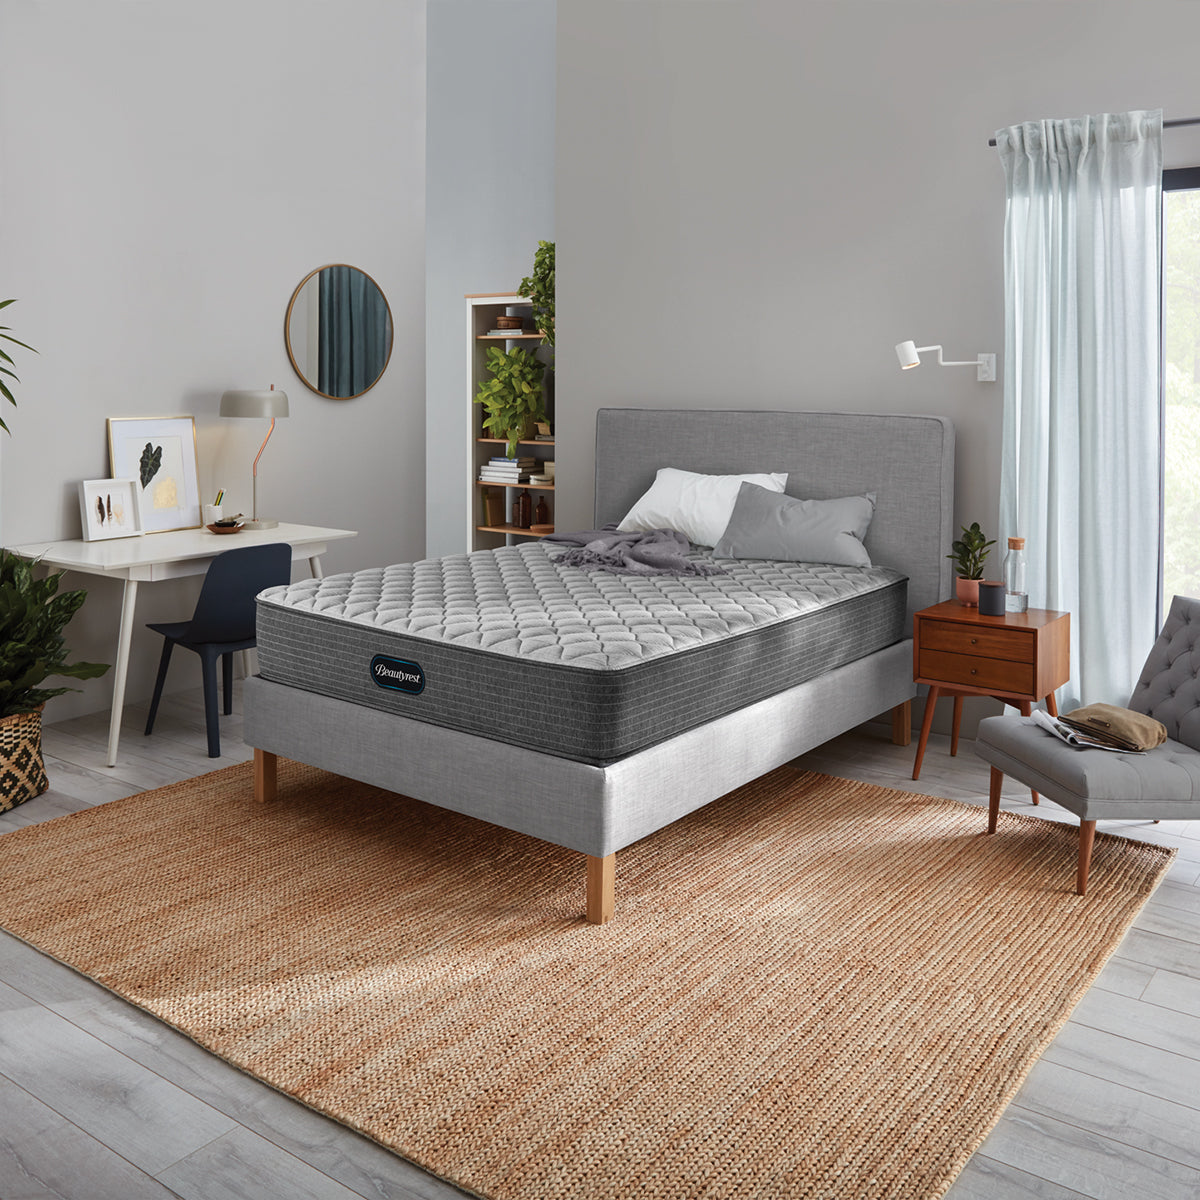 Beautyrest Reach Thompson Extra Firm Mattress On Bed Frame In Bedroom